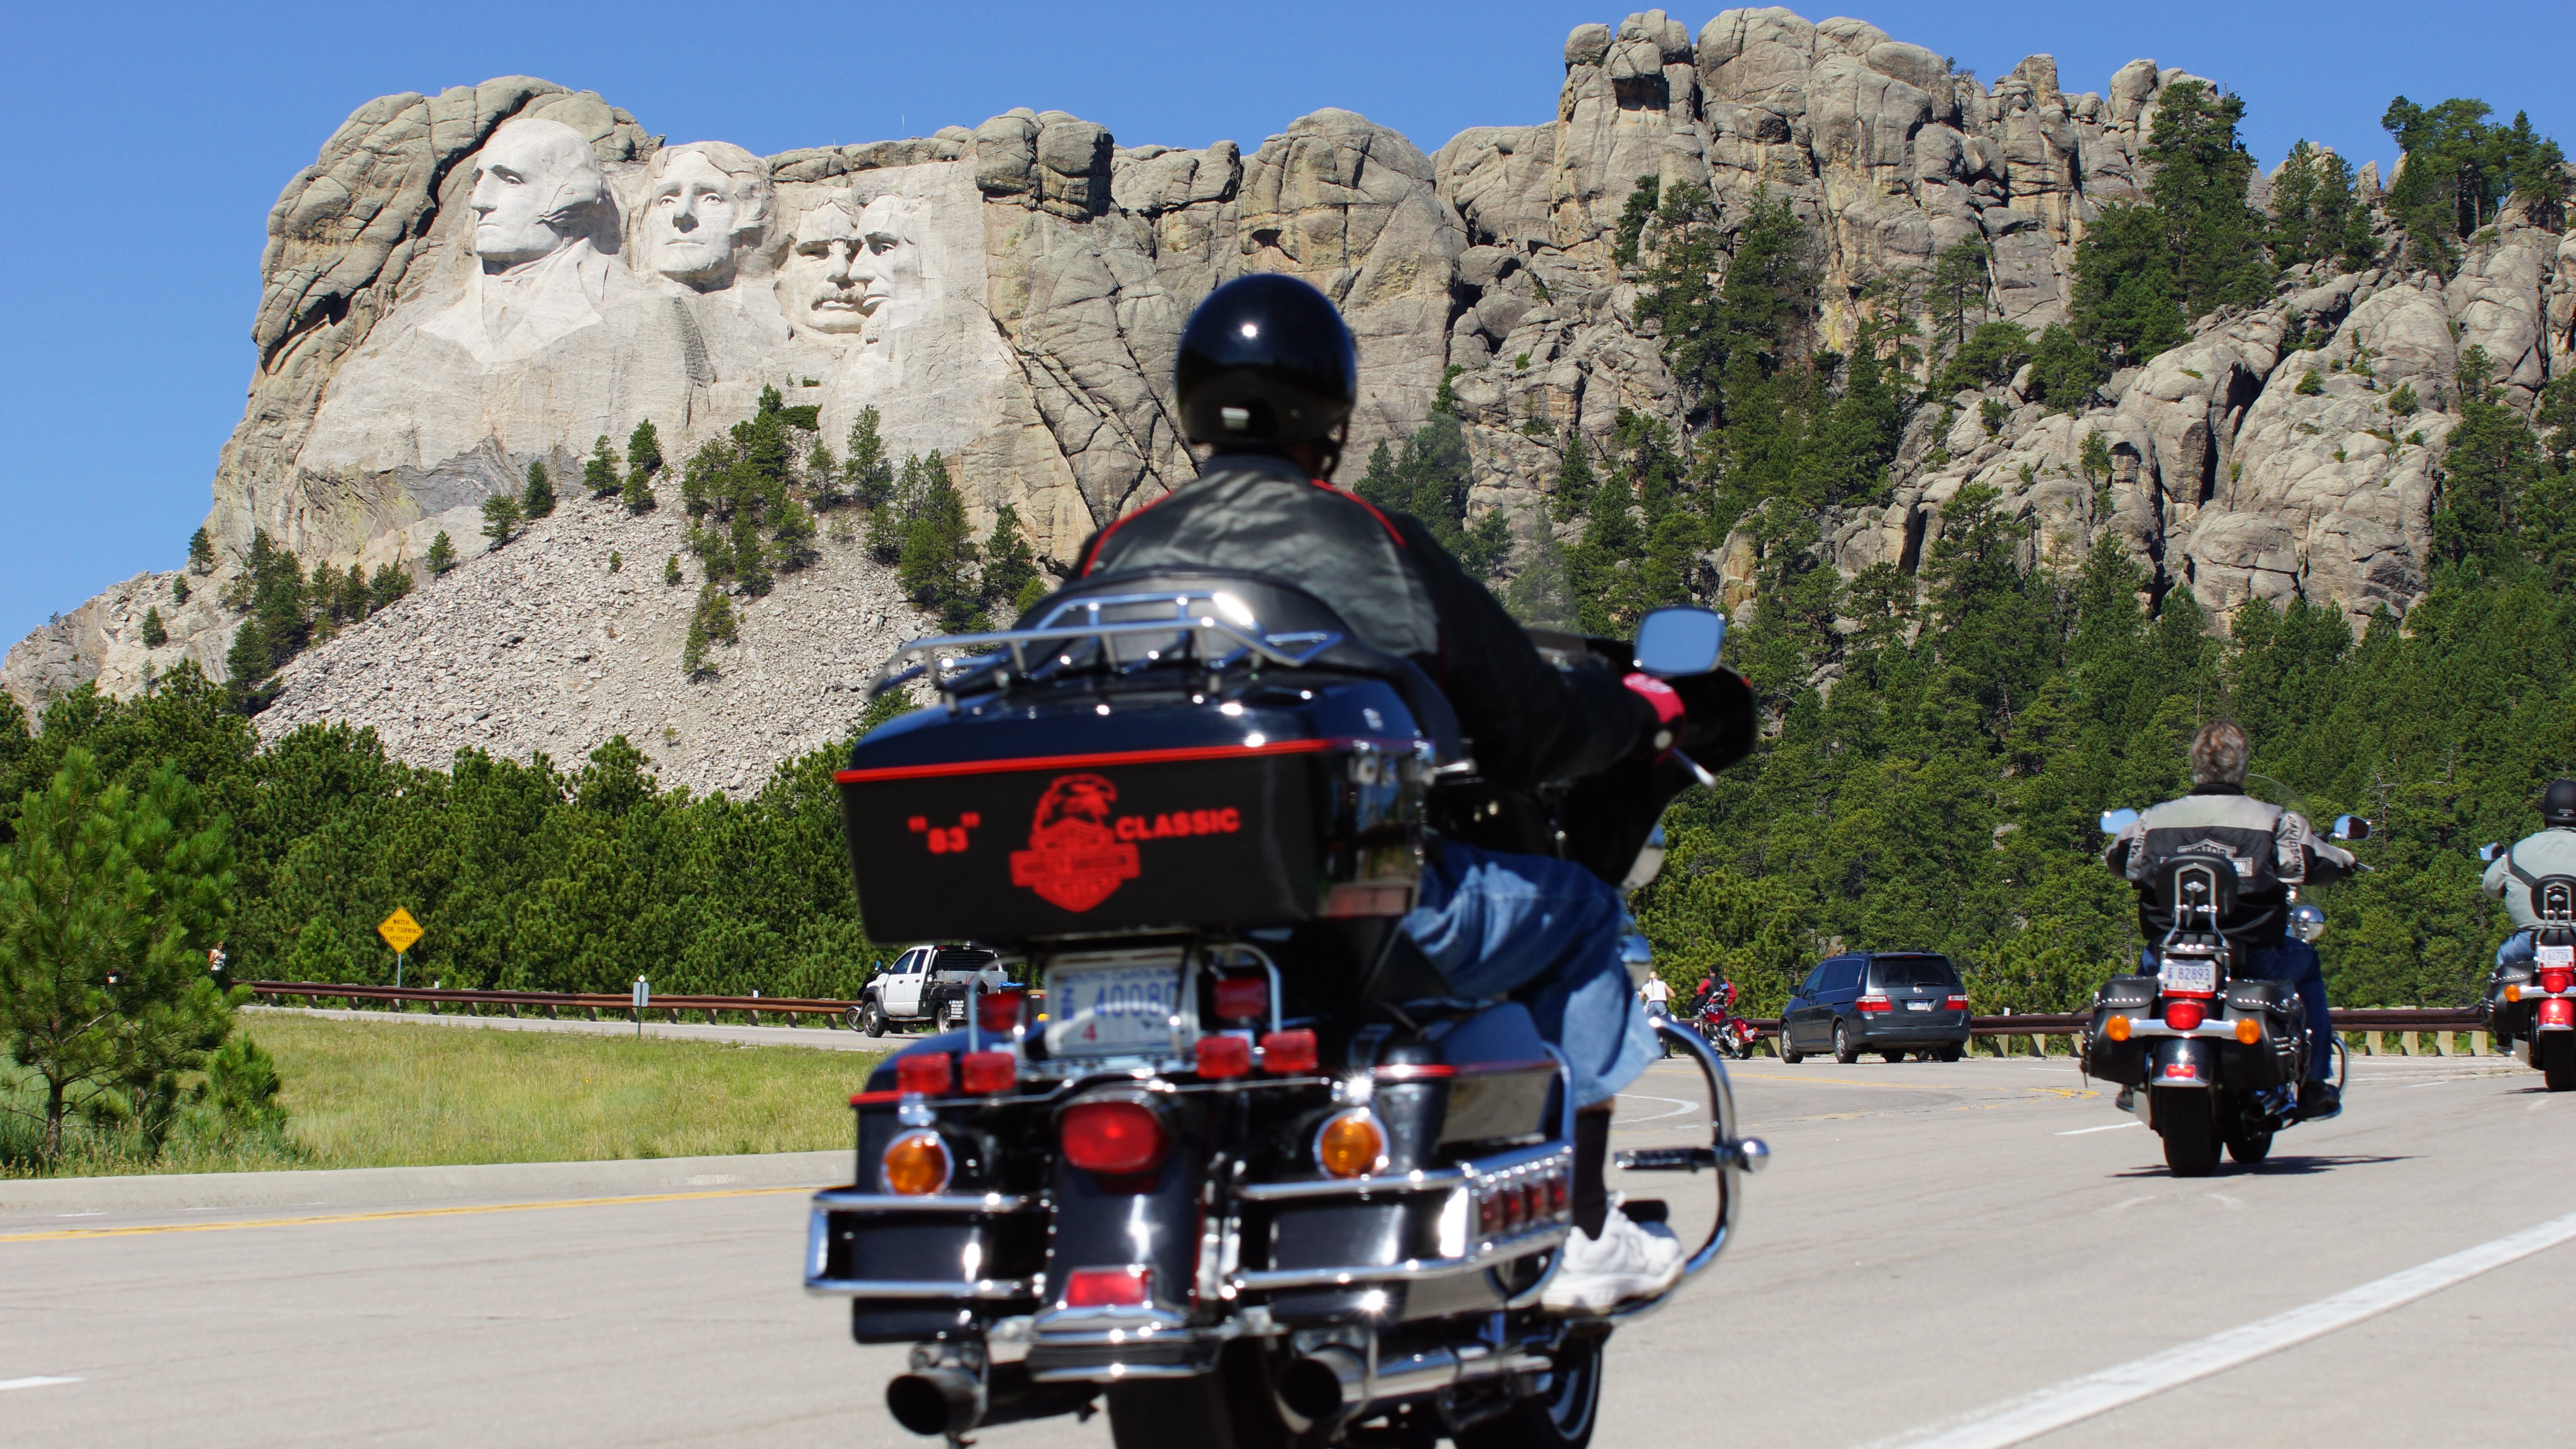 4 Sturgis Motorcycle Rides Every Biker Should Experience